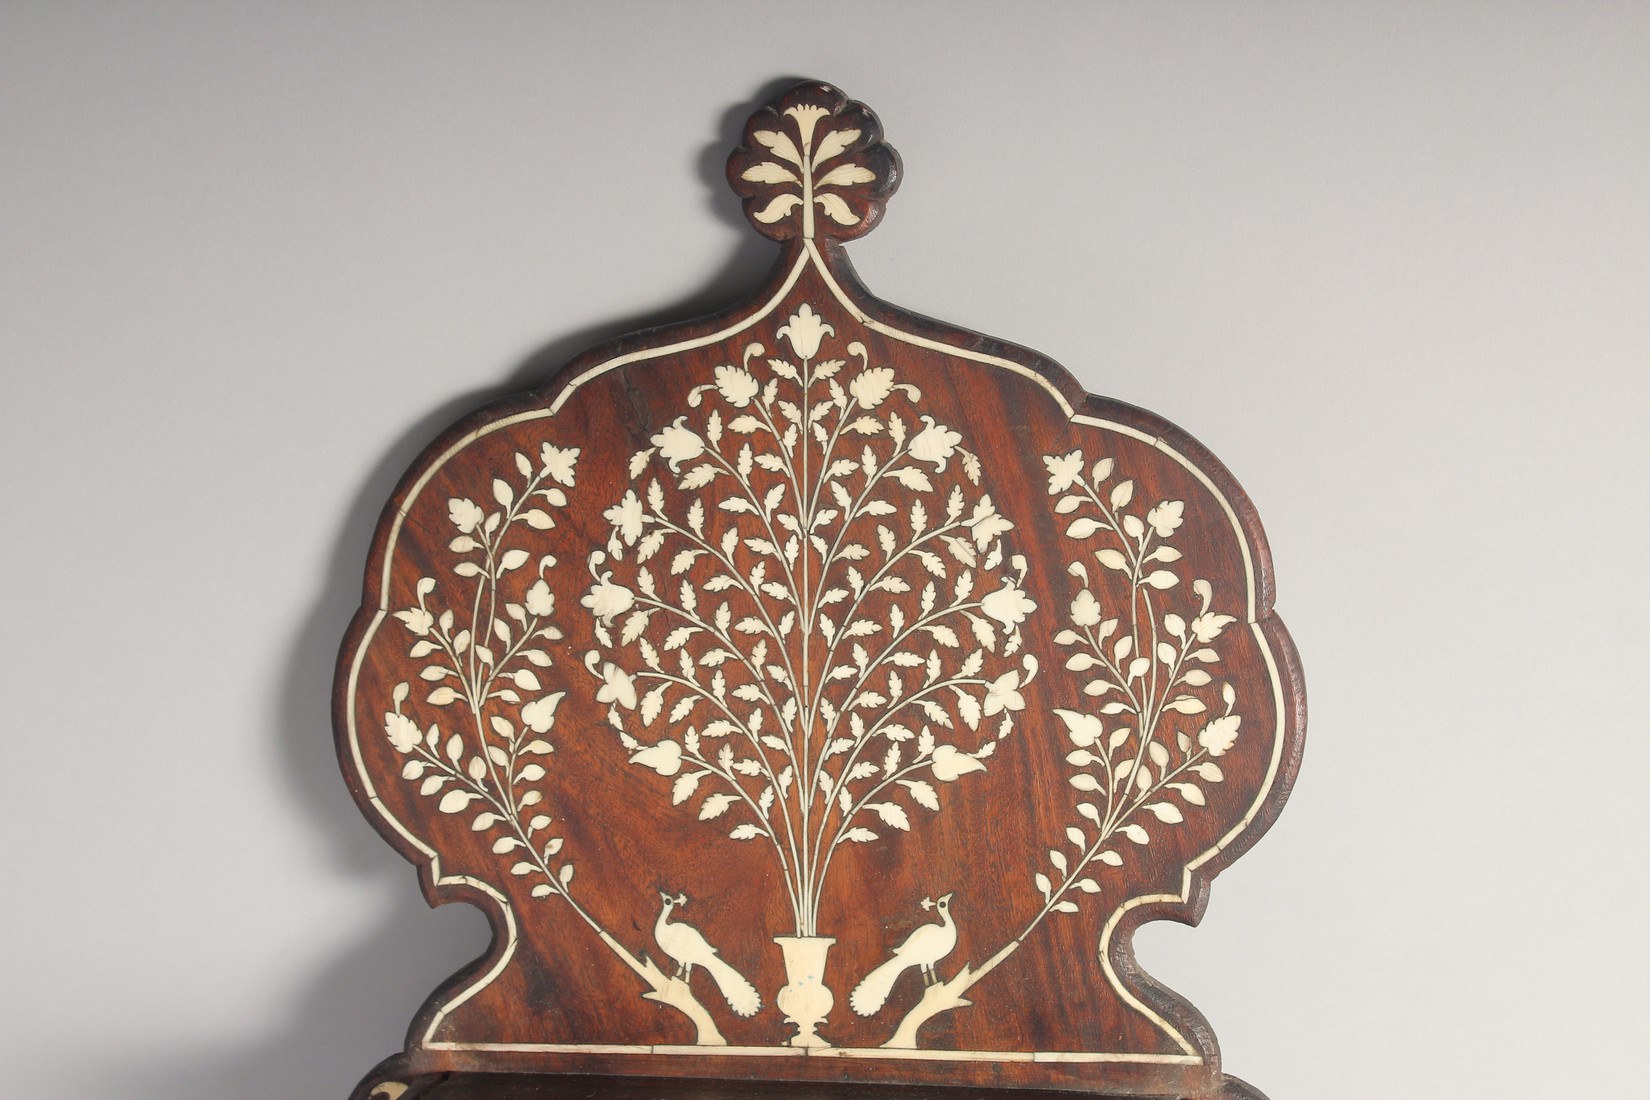 A VERY FINE 19TH CENTURY INDIAN HOSHIAPUR BONE INLAID WOODEN INLAID WALL BRACKET, the base formed as - Image 2 of 5